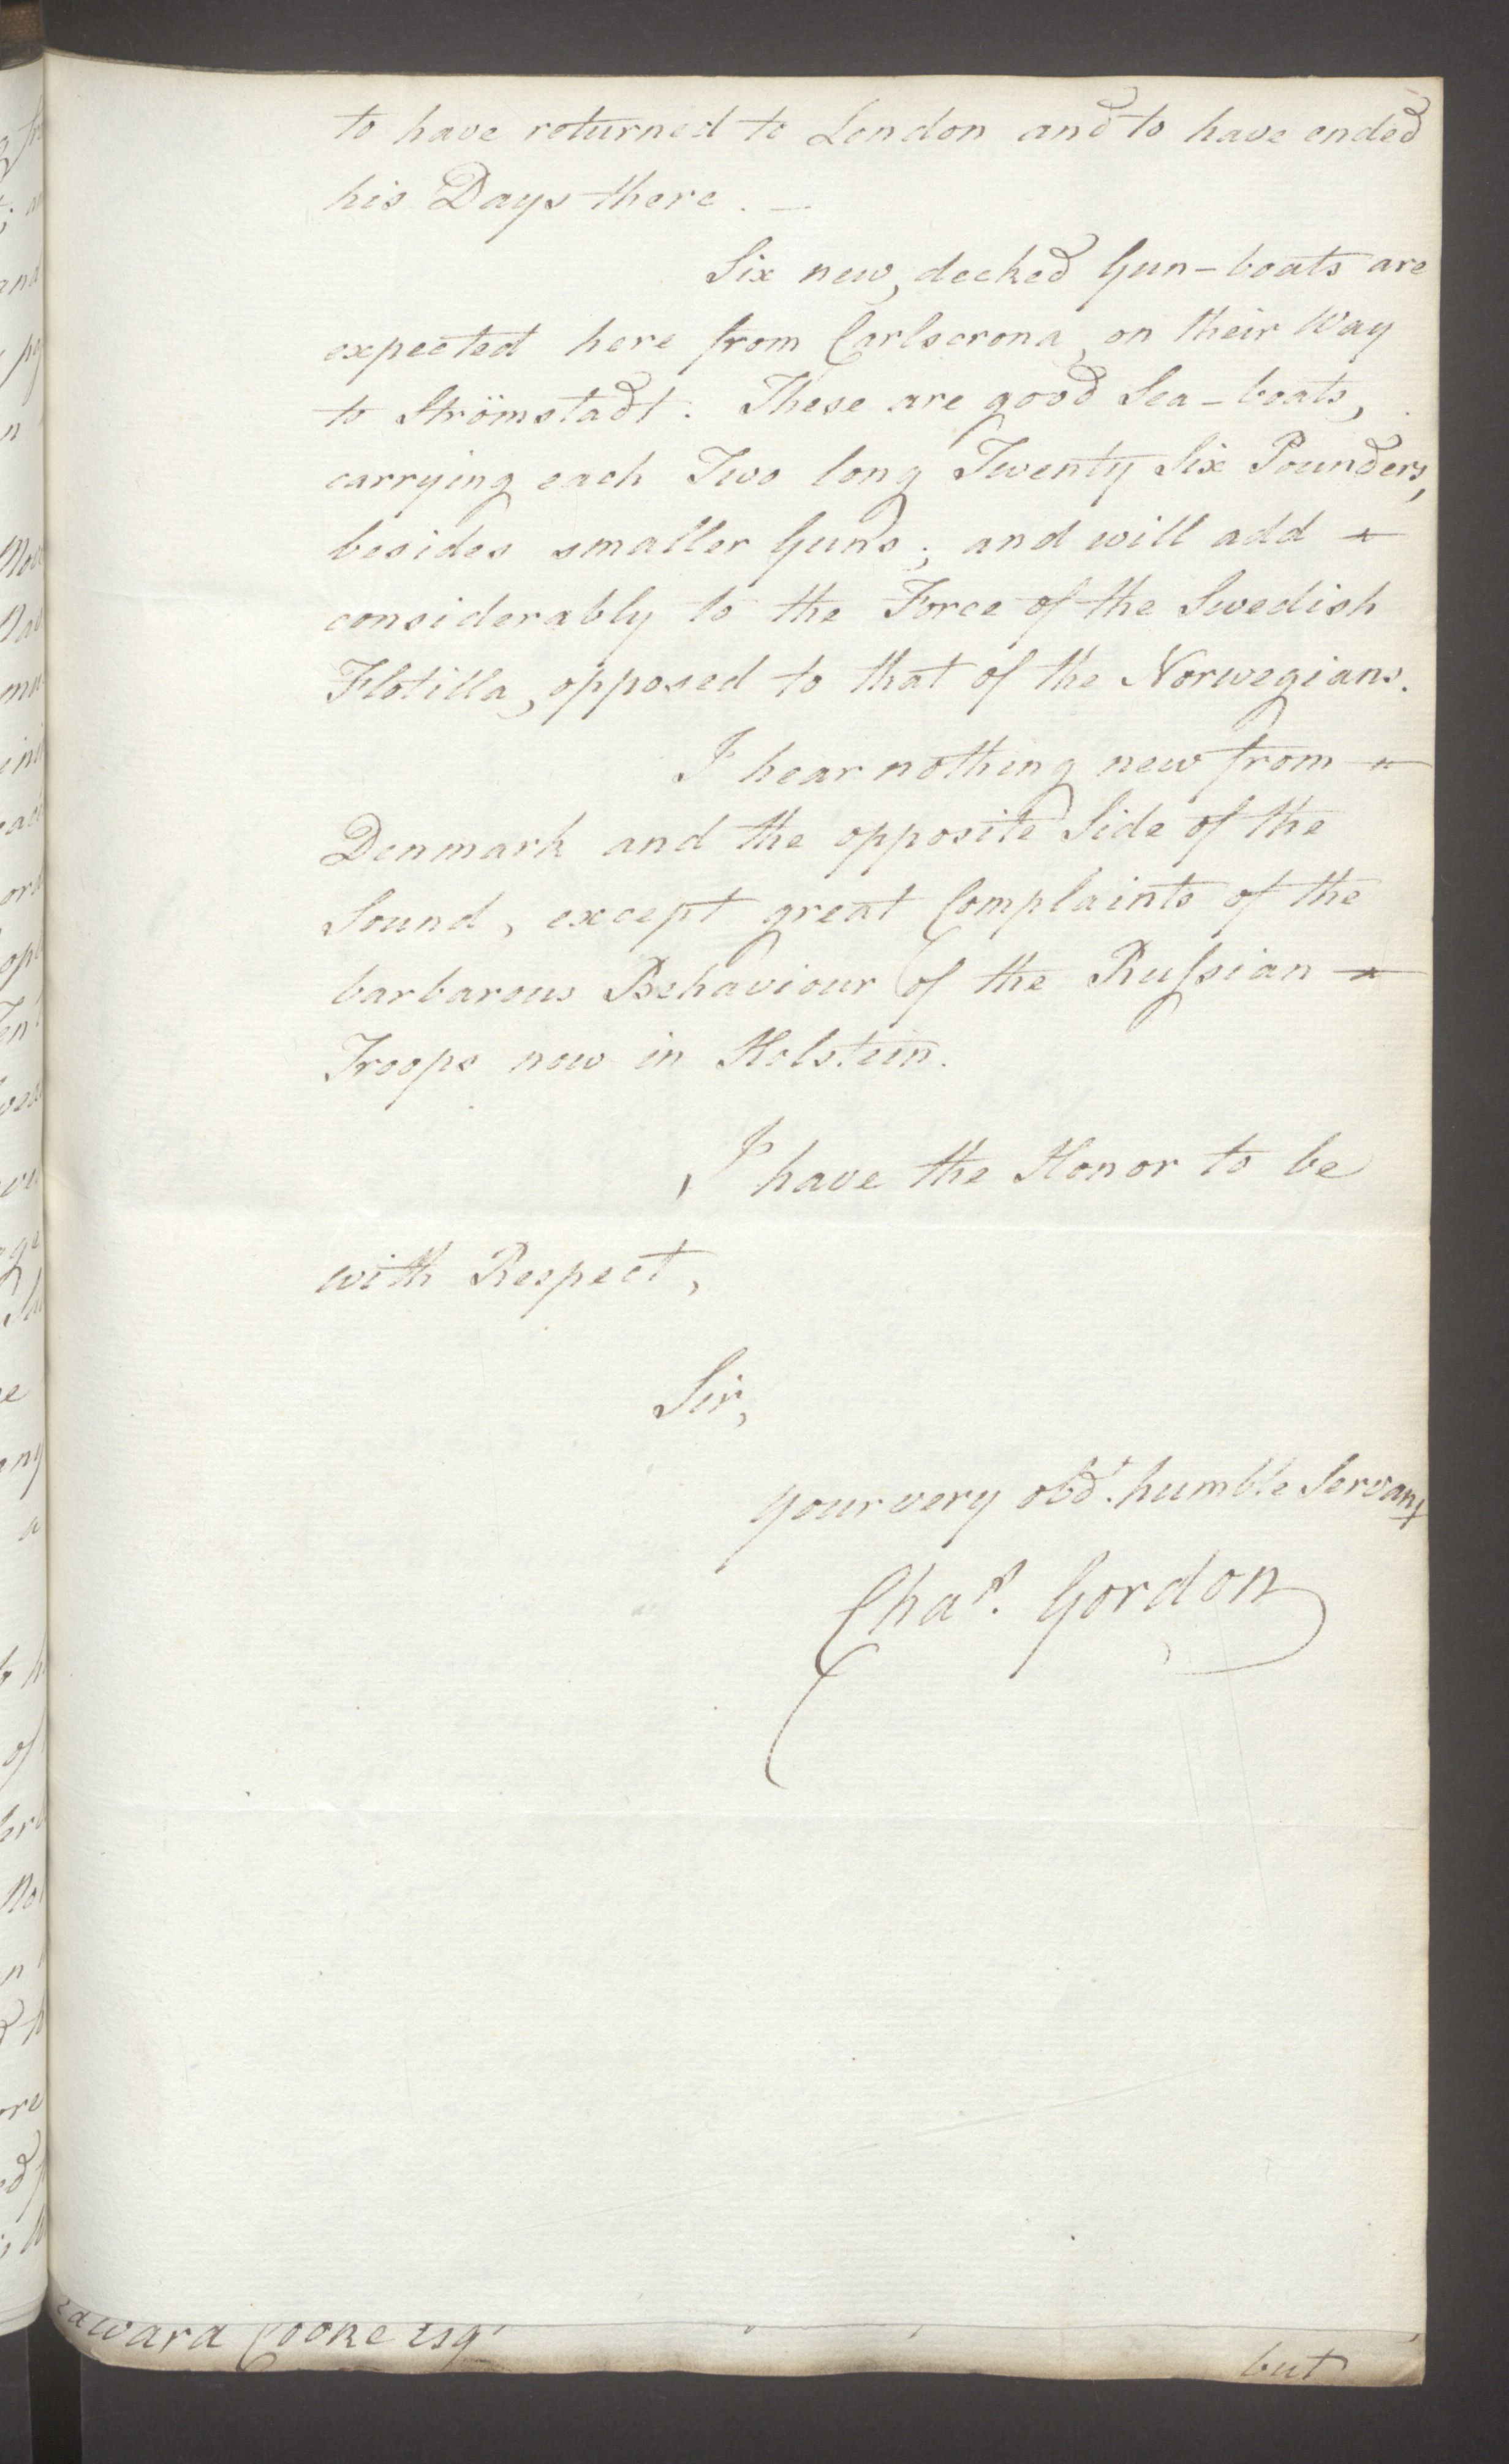 Foreign Office*, UKA/-/FO 38/16: Sir C. Gordon. Reports from Malmö, Jonkoping, and Helsingborg, 1814, p. 73